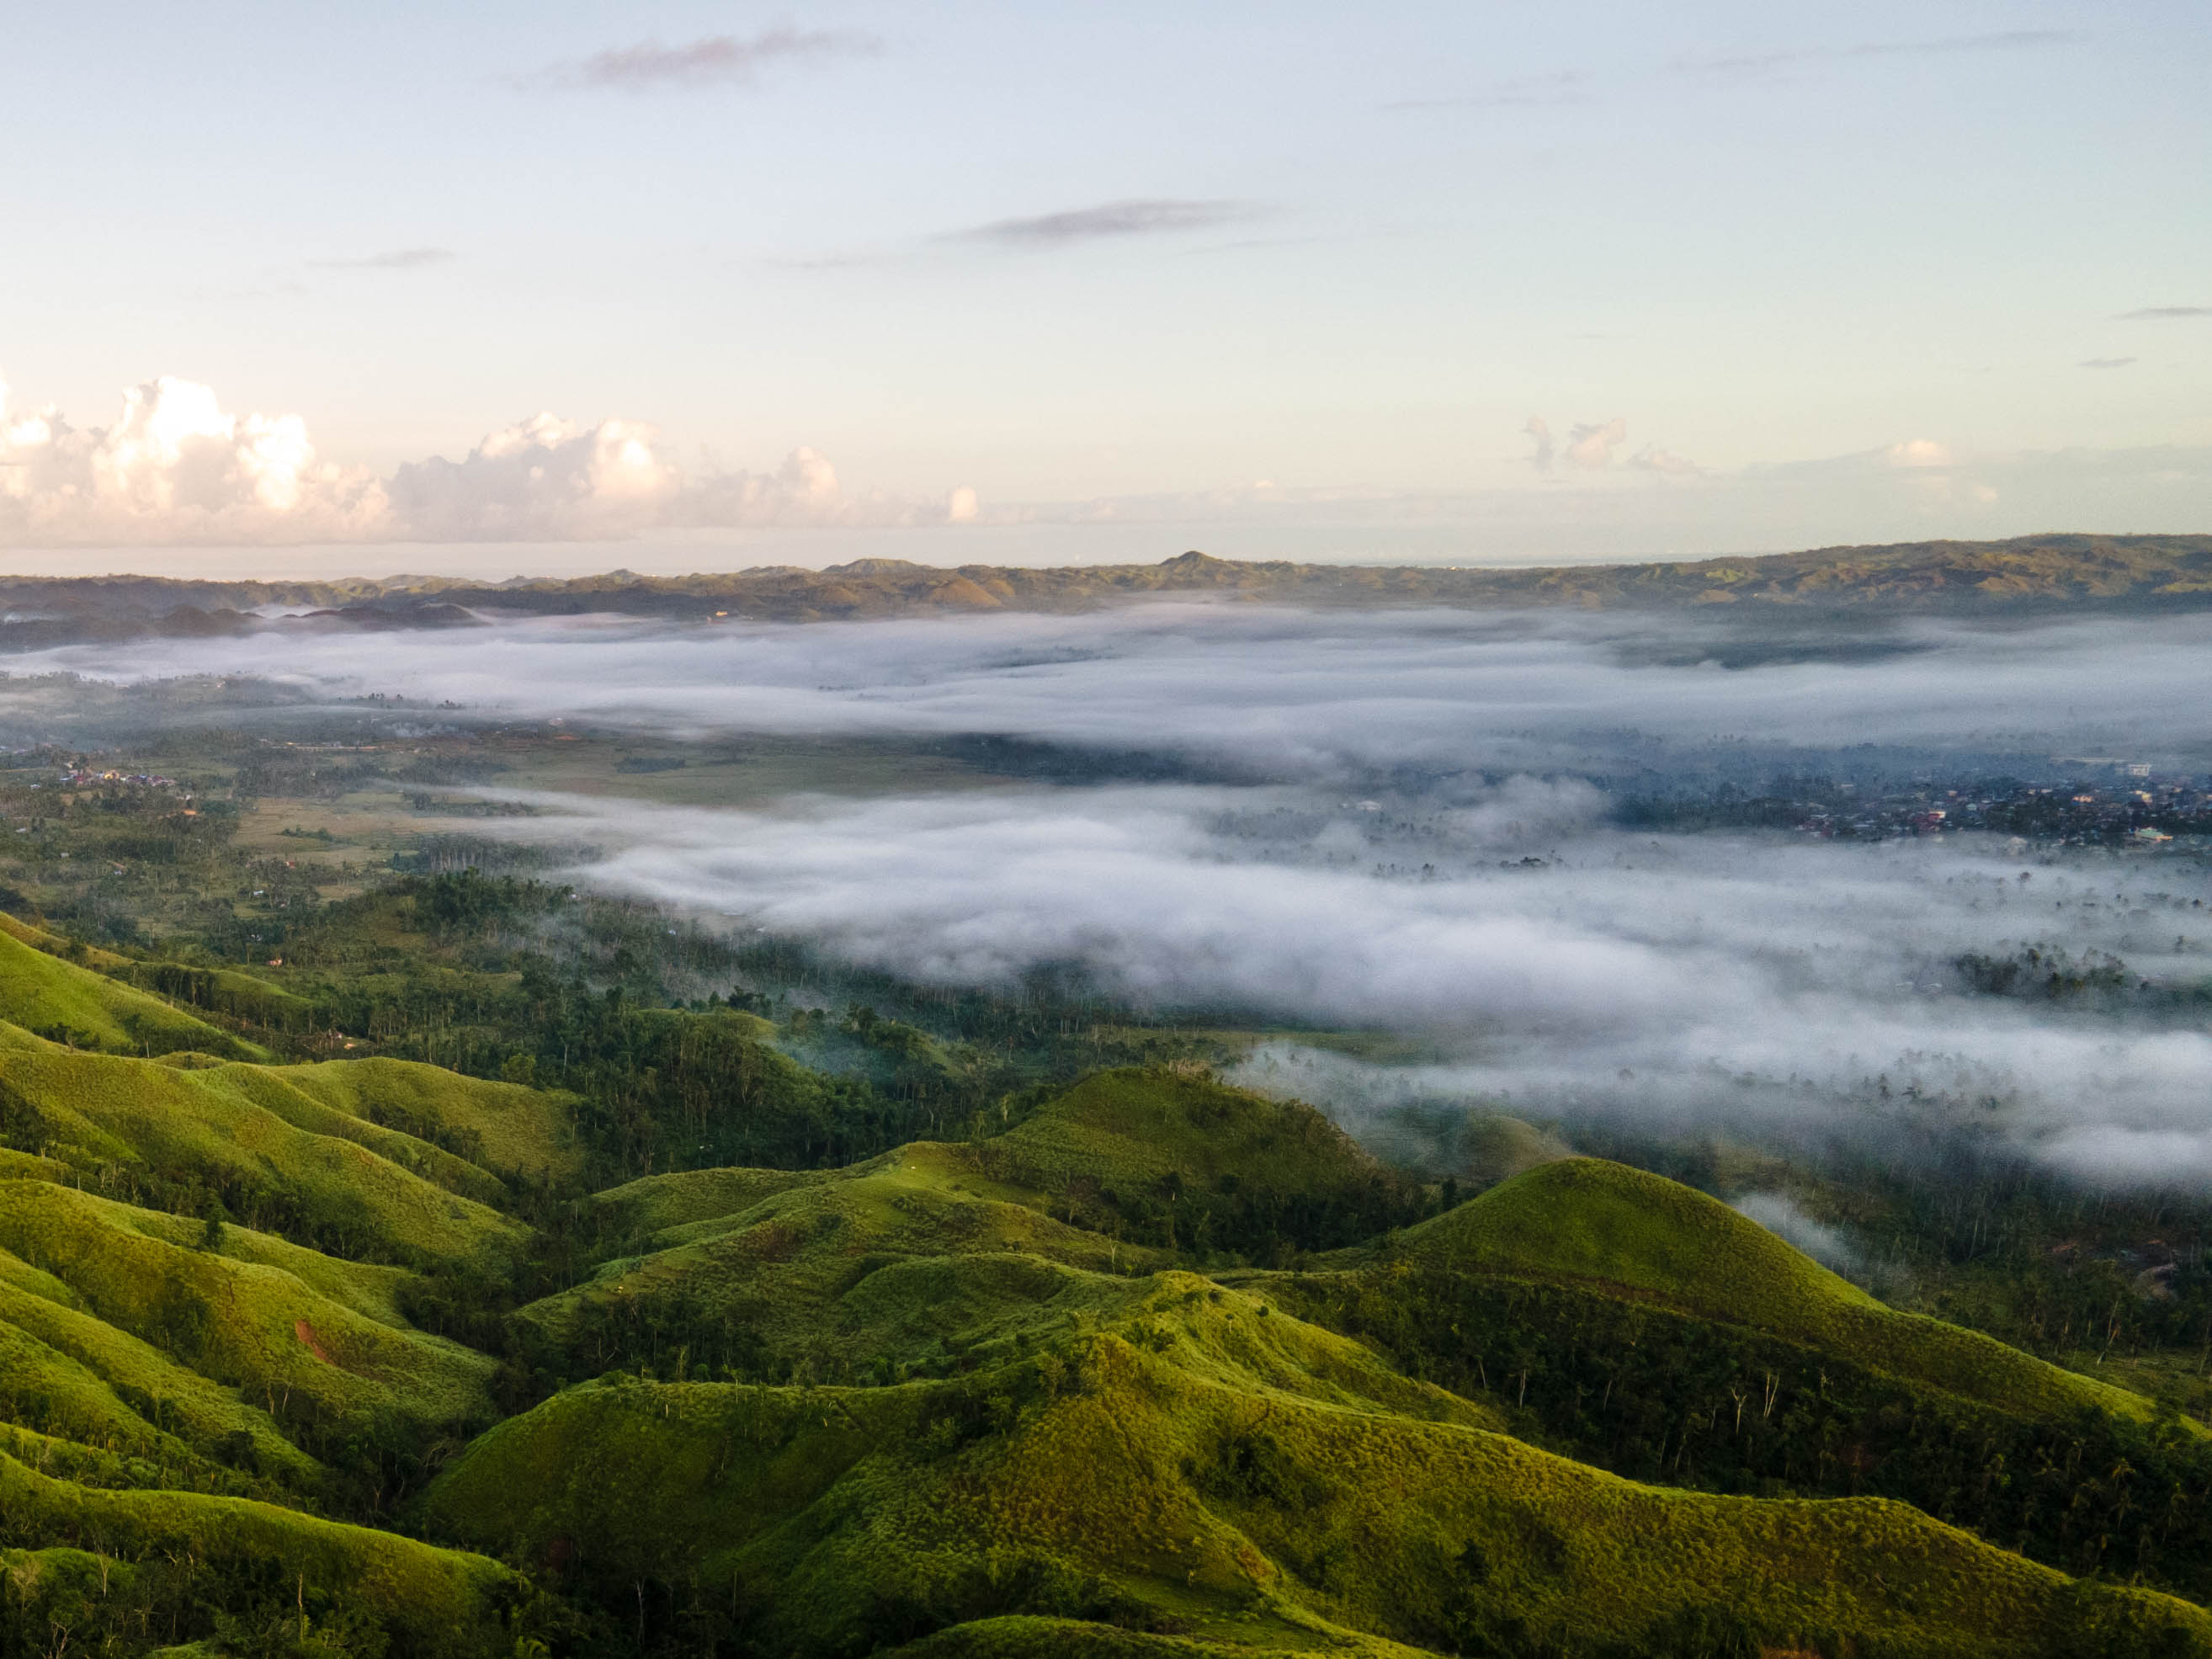 The Sea Of Clouds, Bohol, Philippines 2022 - Everything You Need To Know!!!